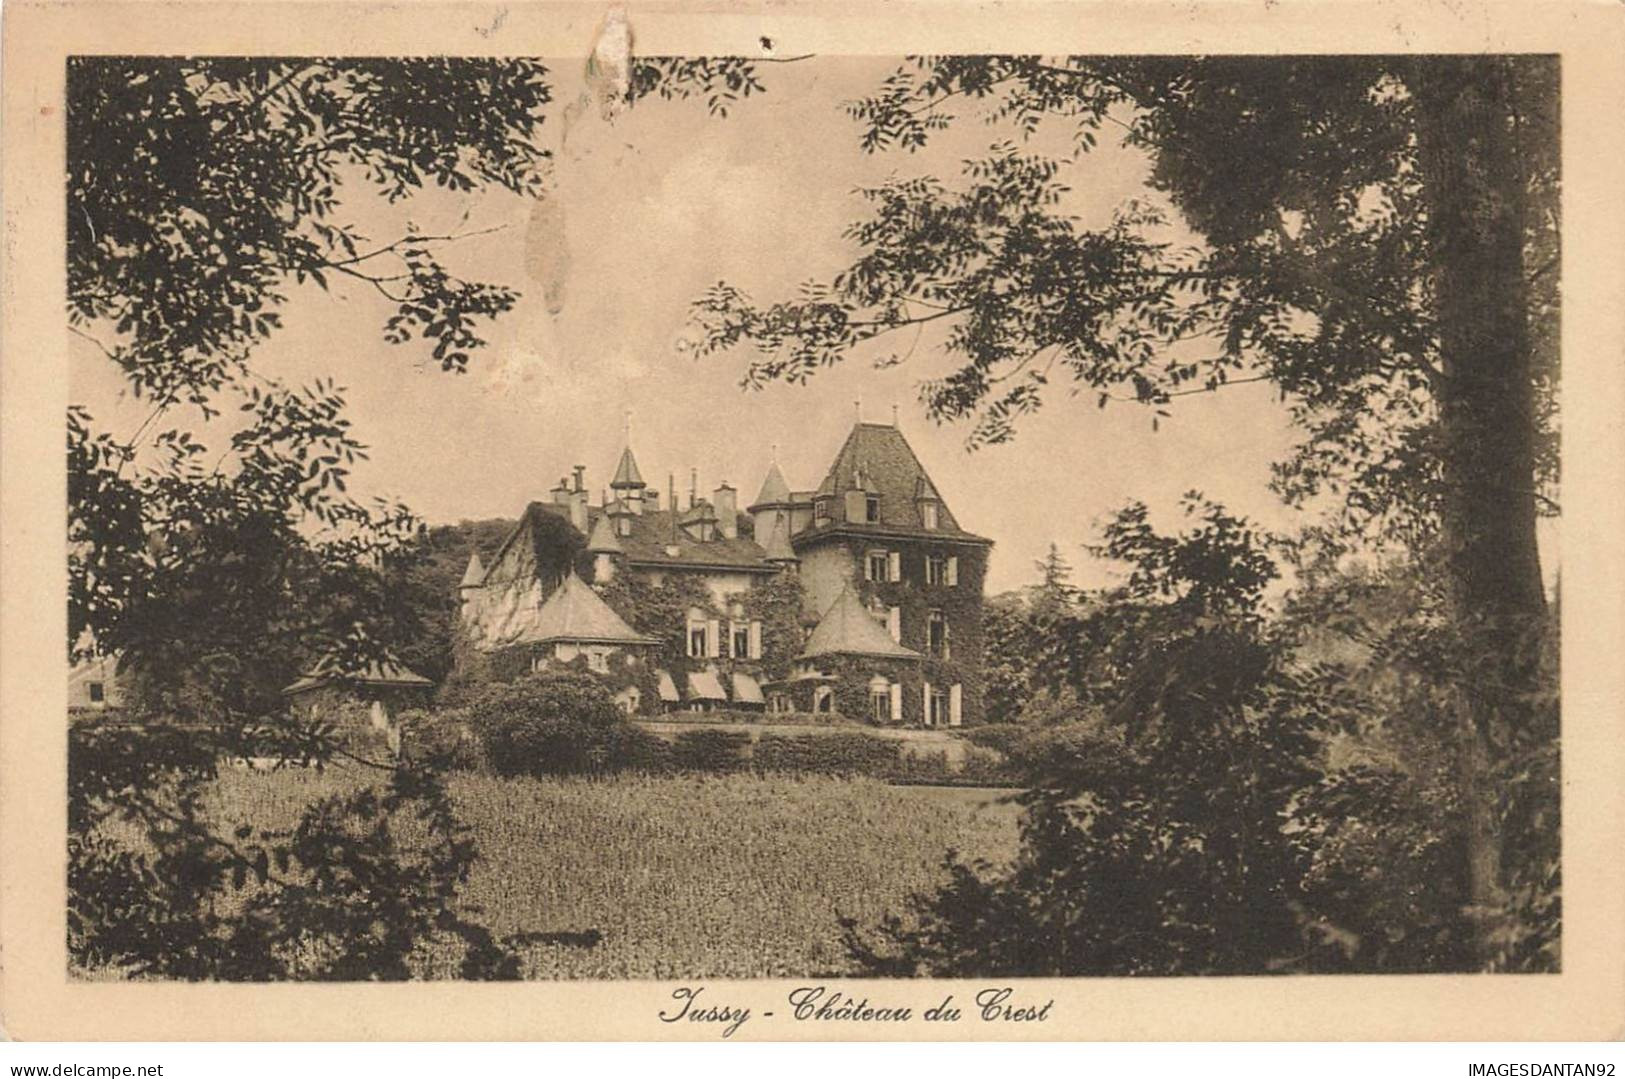 SUISSE #MK44790 JUSSY CHATEAU DU BREST - Jussy